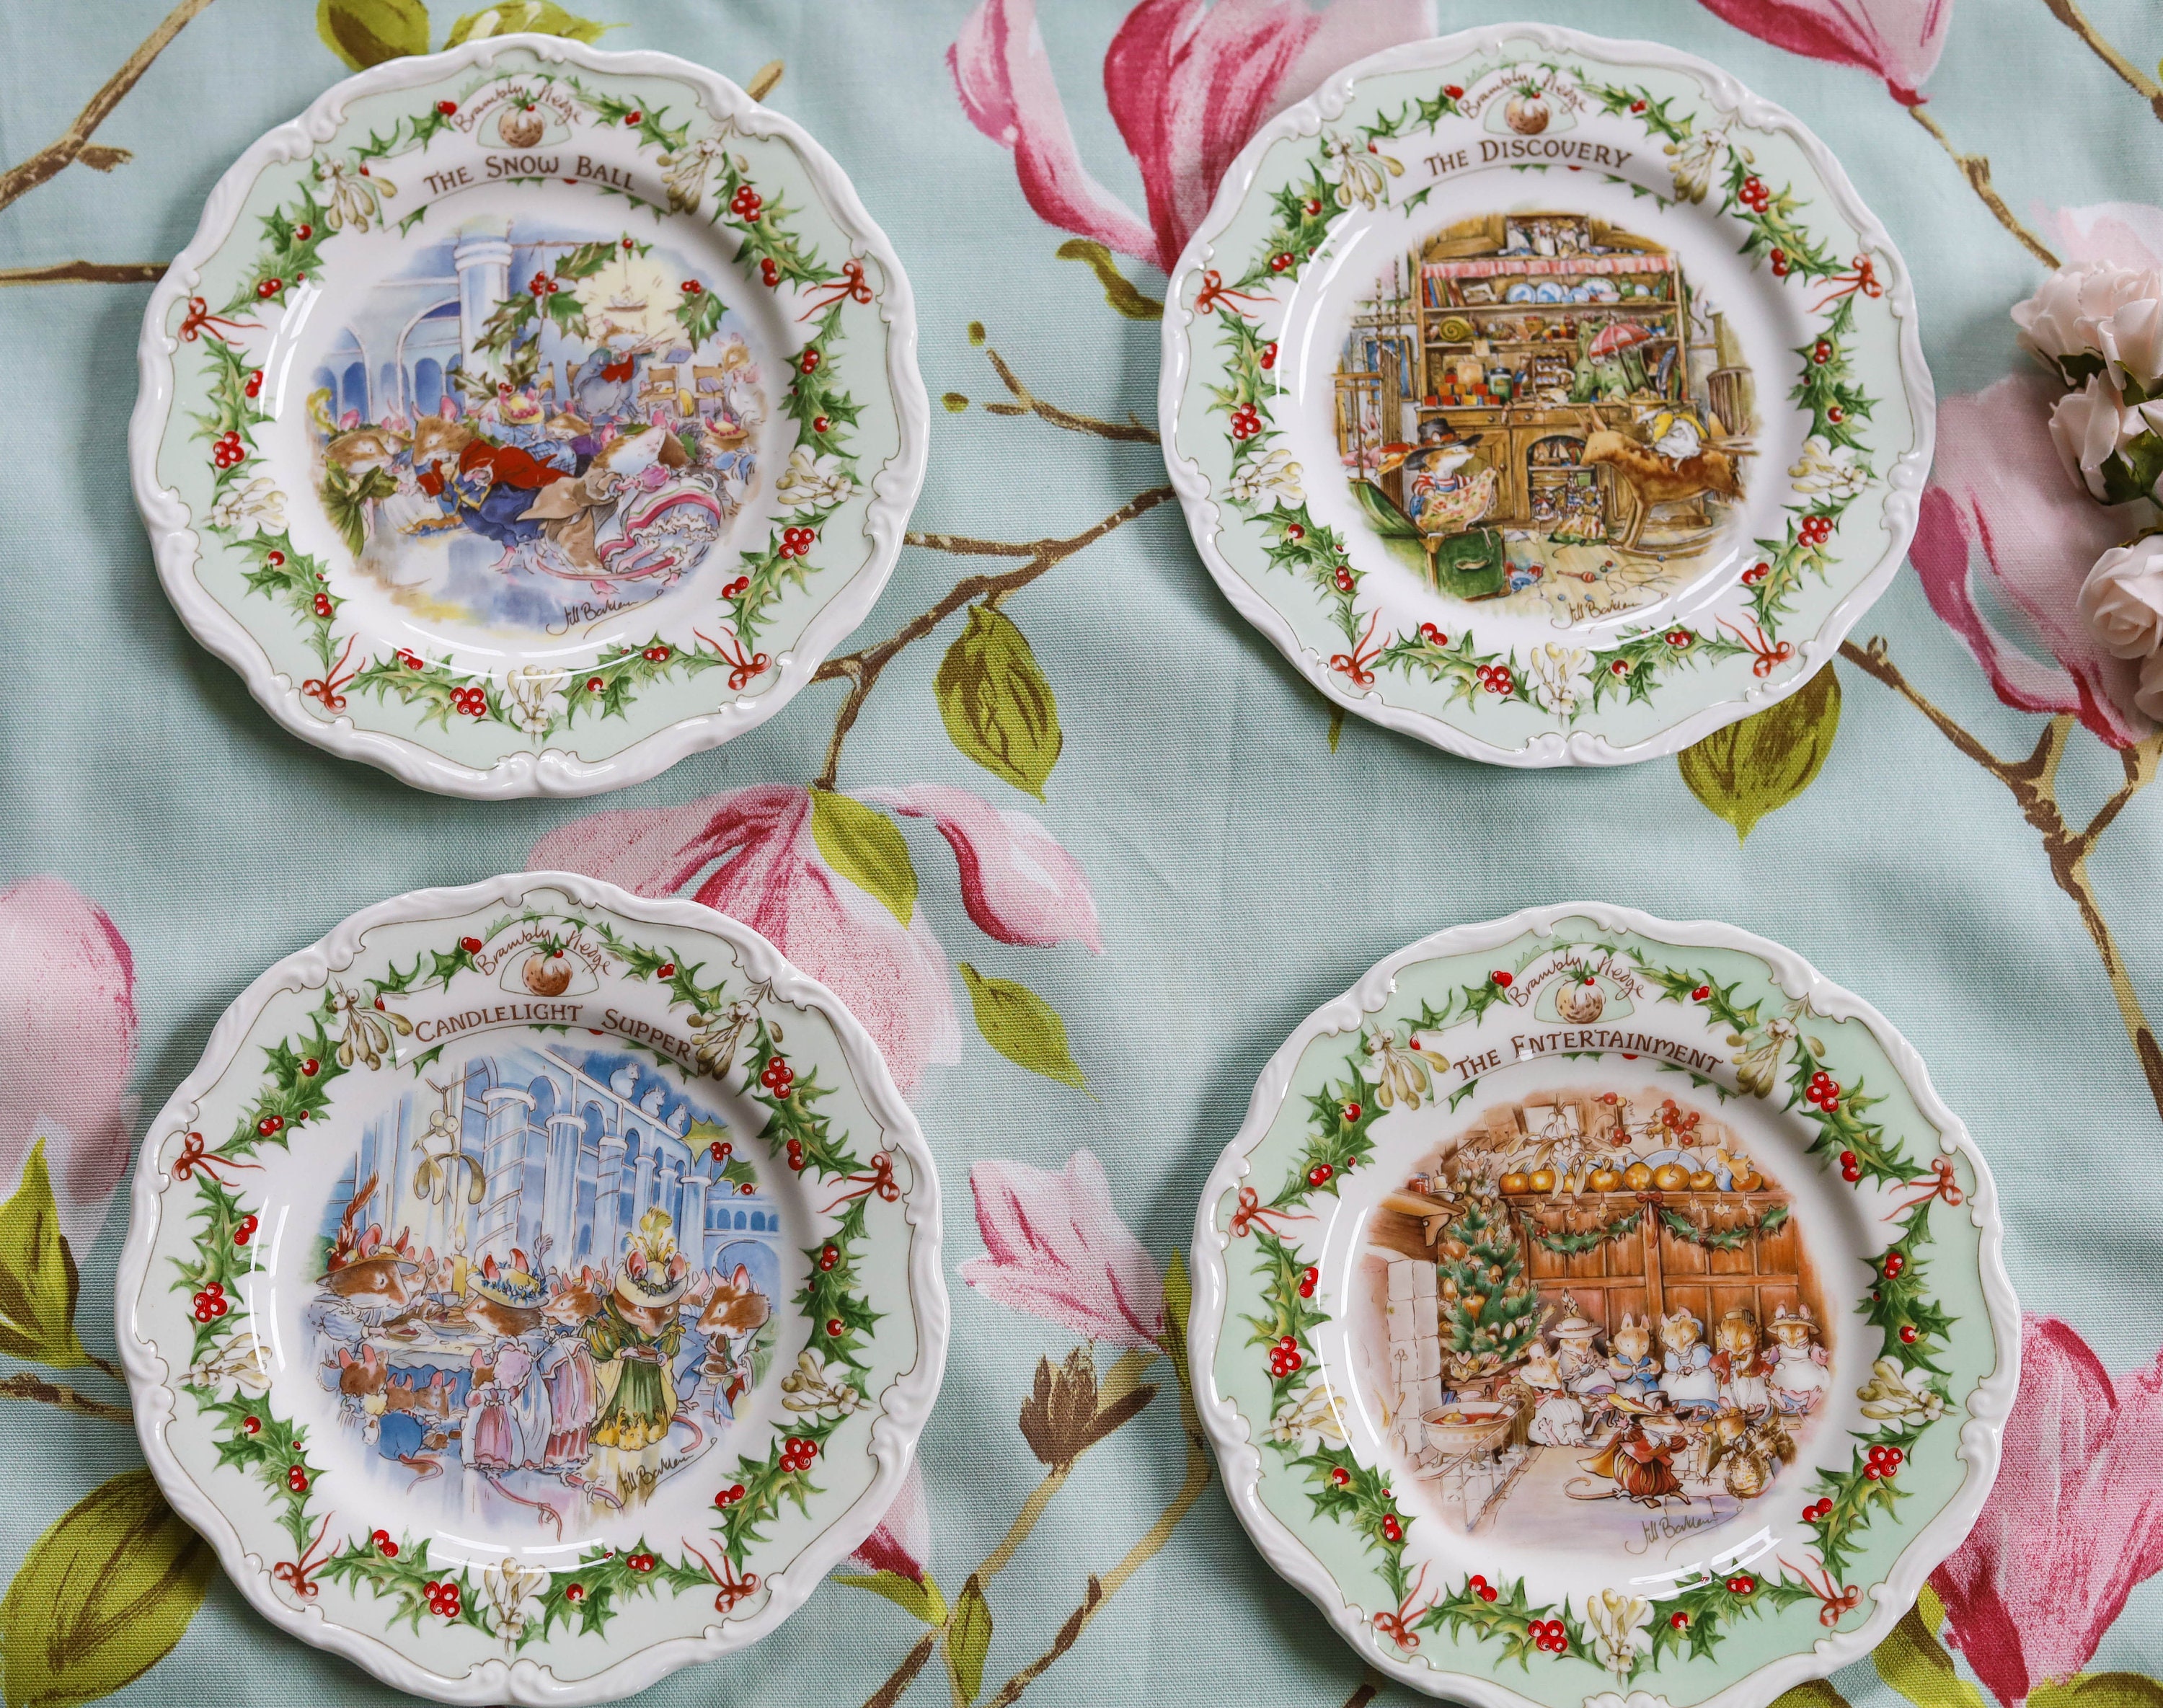 Royal Doulton Brambly Hedge THE WEDDING - Tea Cup, Saucer and Plate - Ruby  Lane